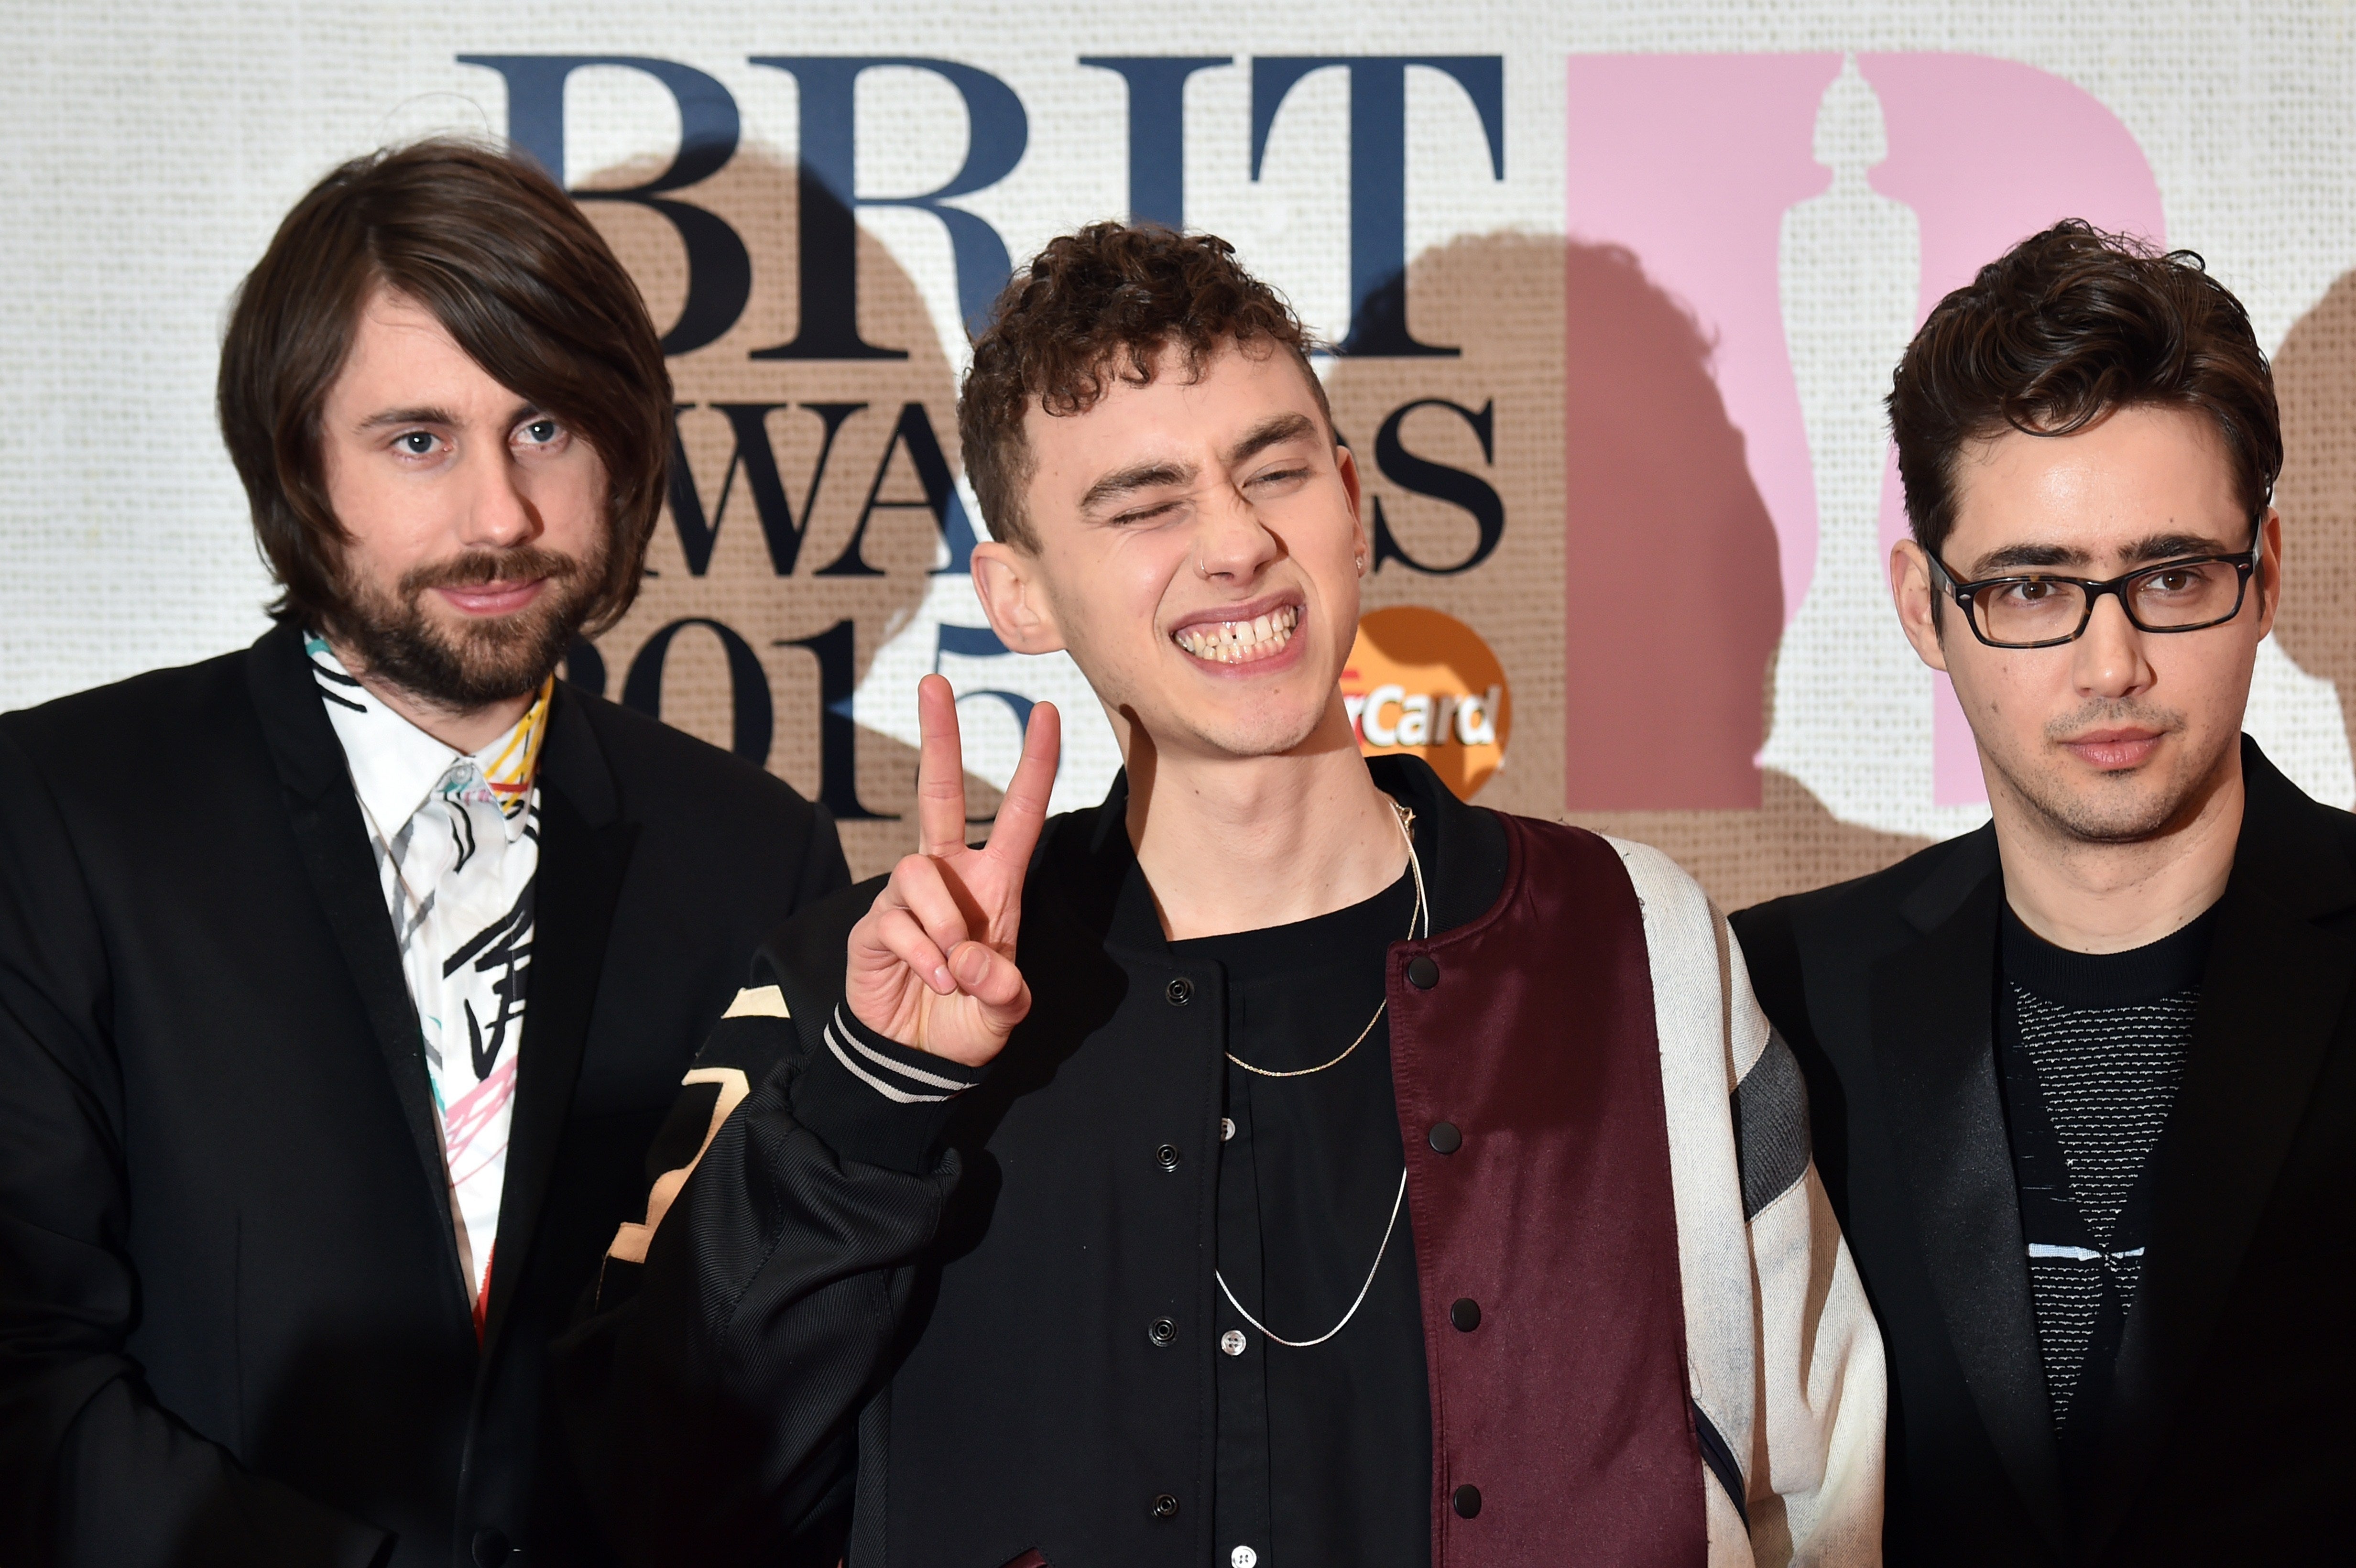 Years & Years: Mikey Goldsworthy, Olly Alexander and Emre Turkmen on the red carpet at the 2015 Brit Awards